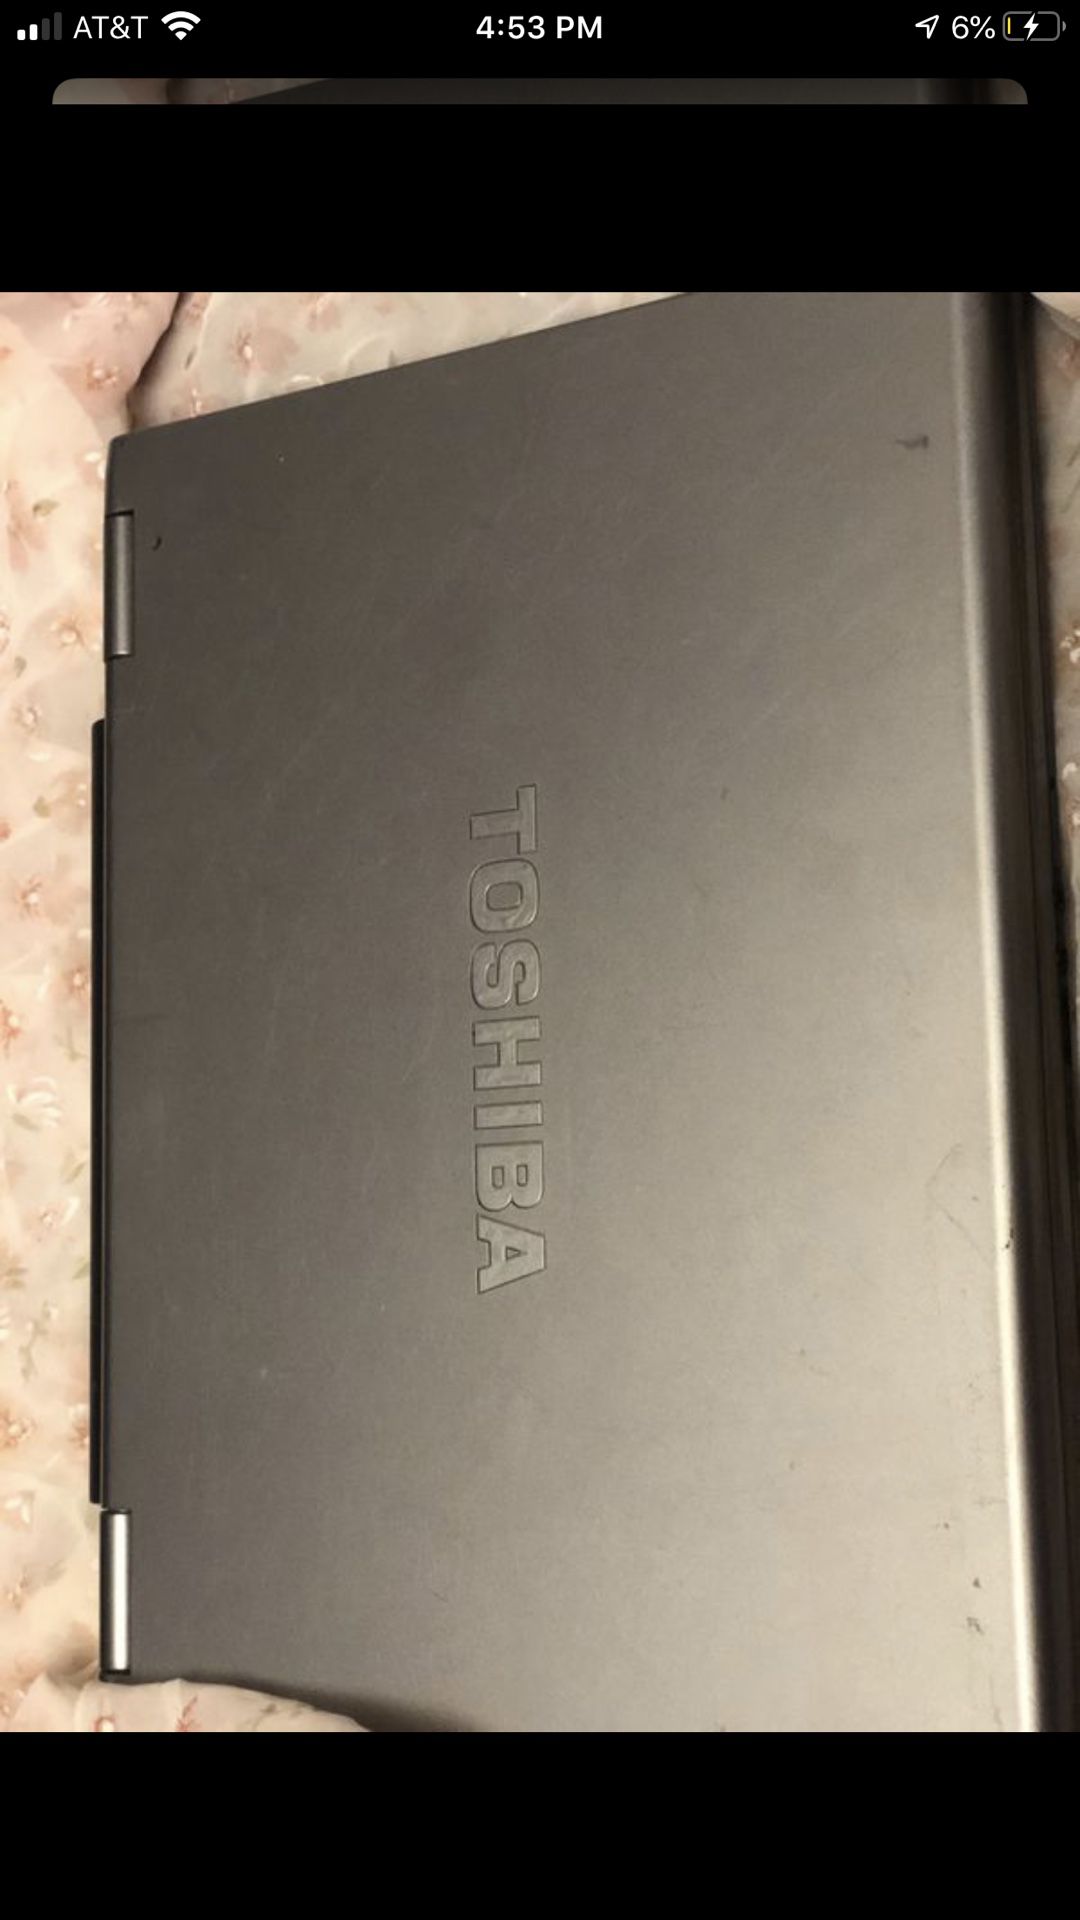 Toshiba TECRA M10 Laptop for sale✅ does not have hard drive